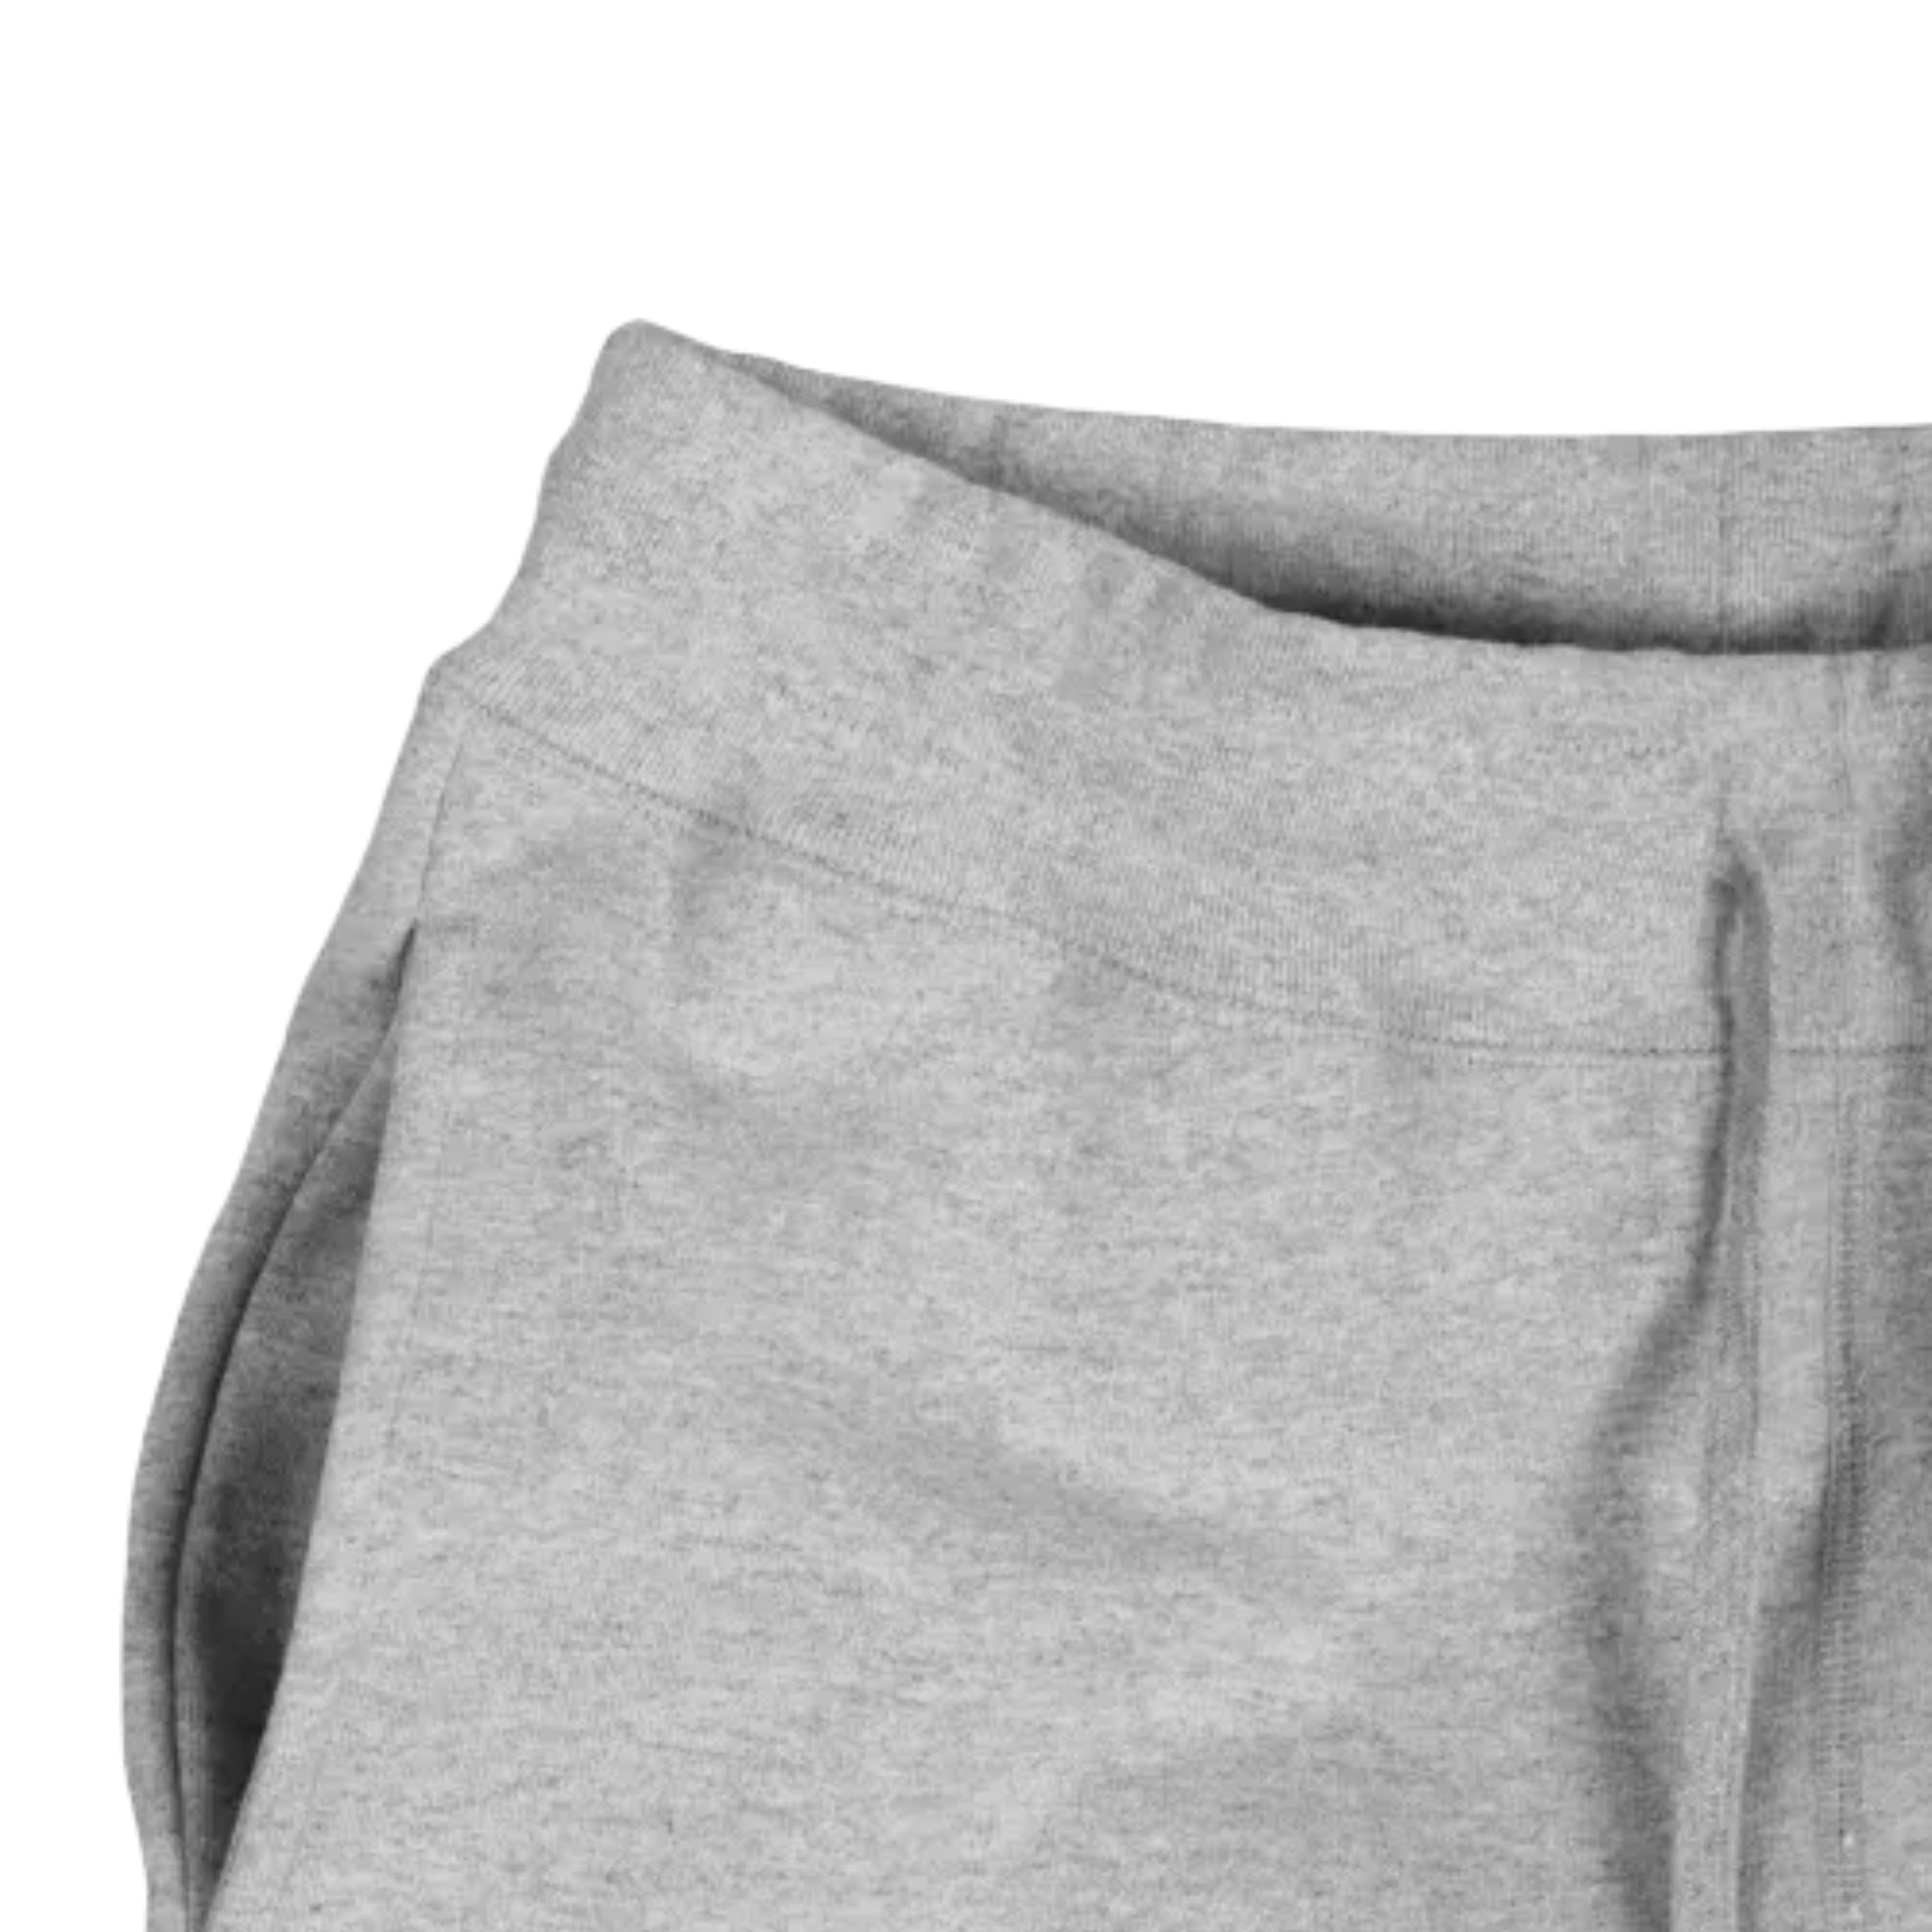 detailed view of grey heavyweight knit joggers against white background